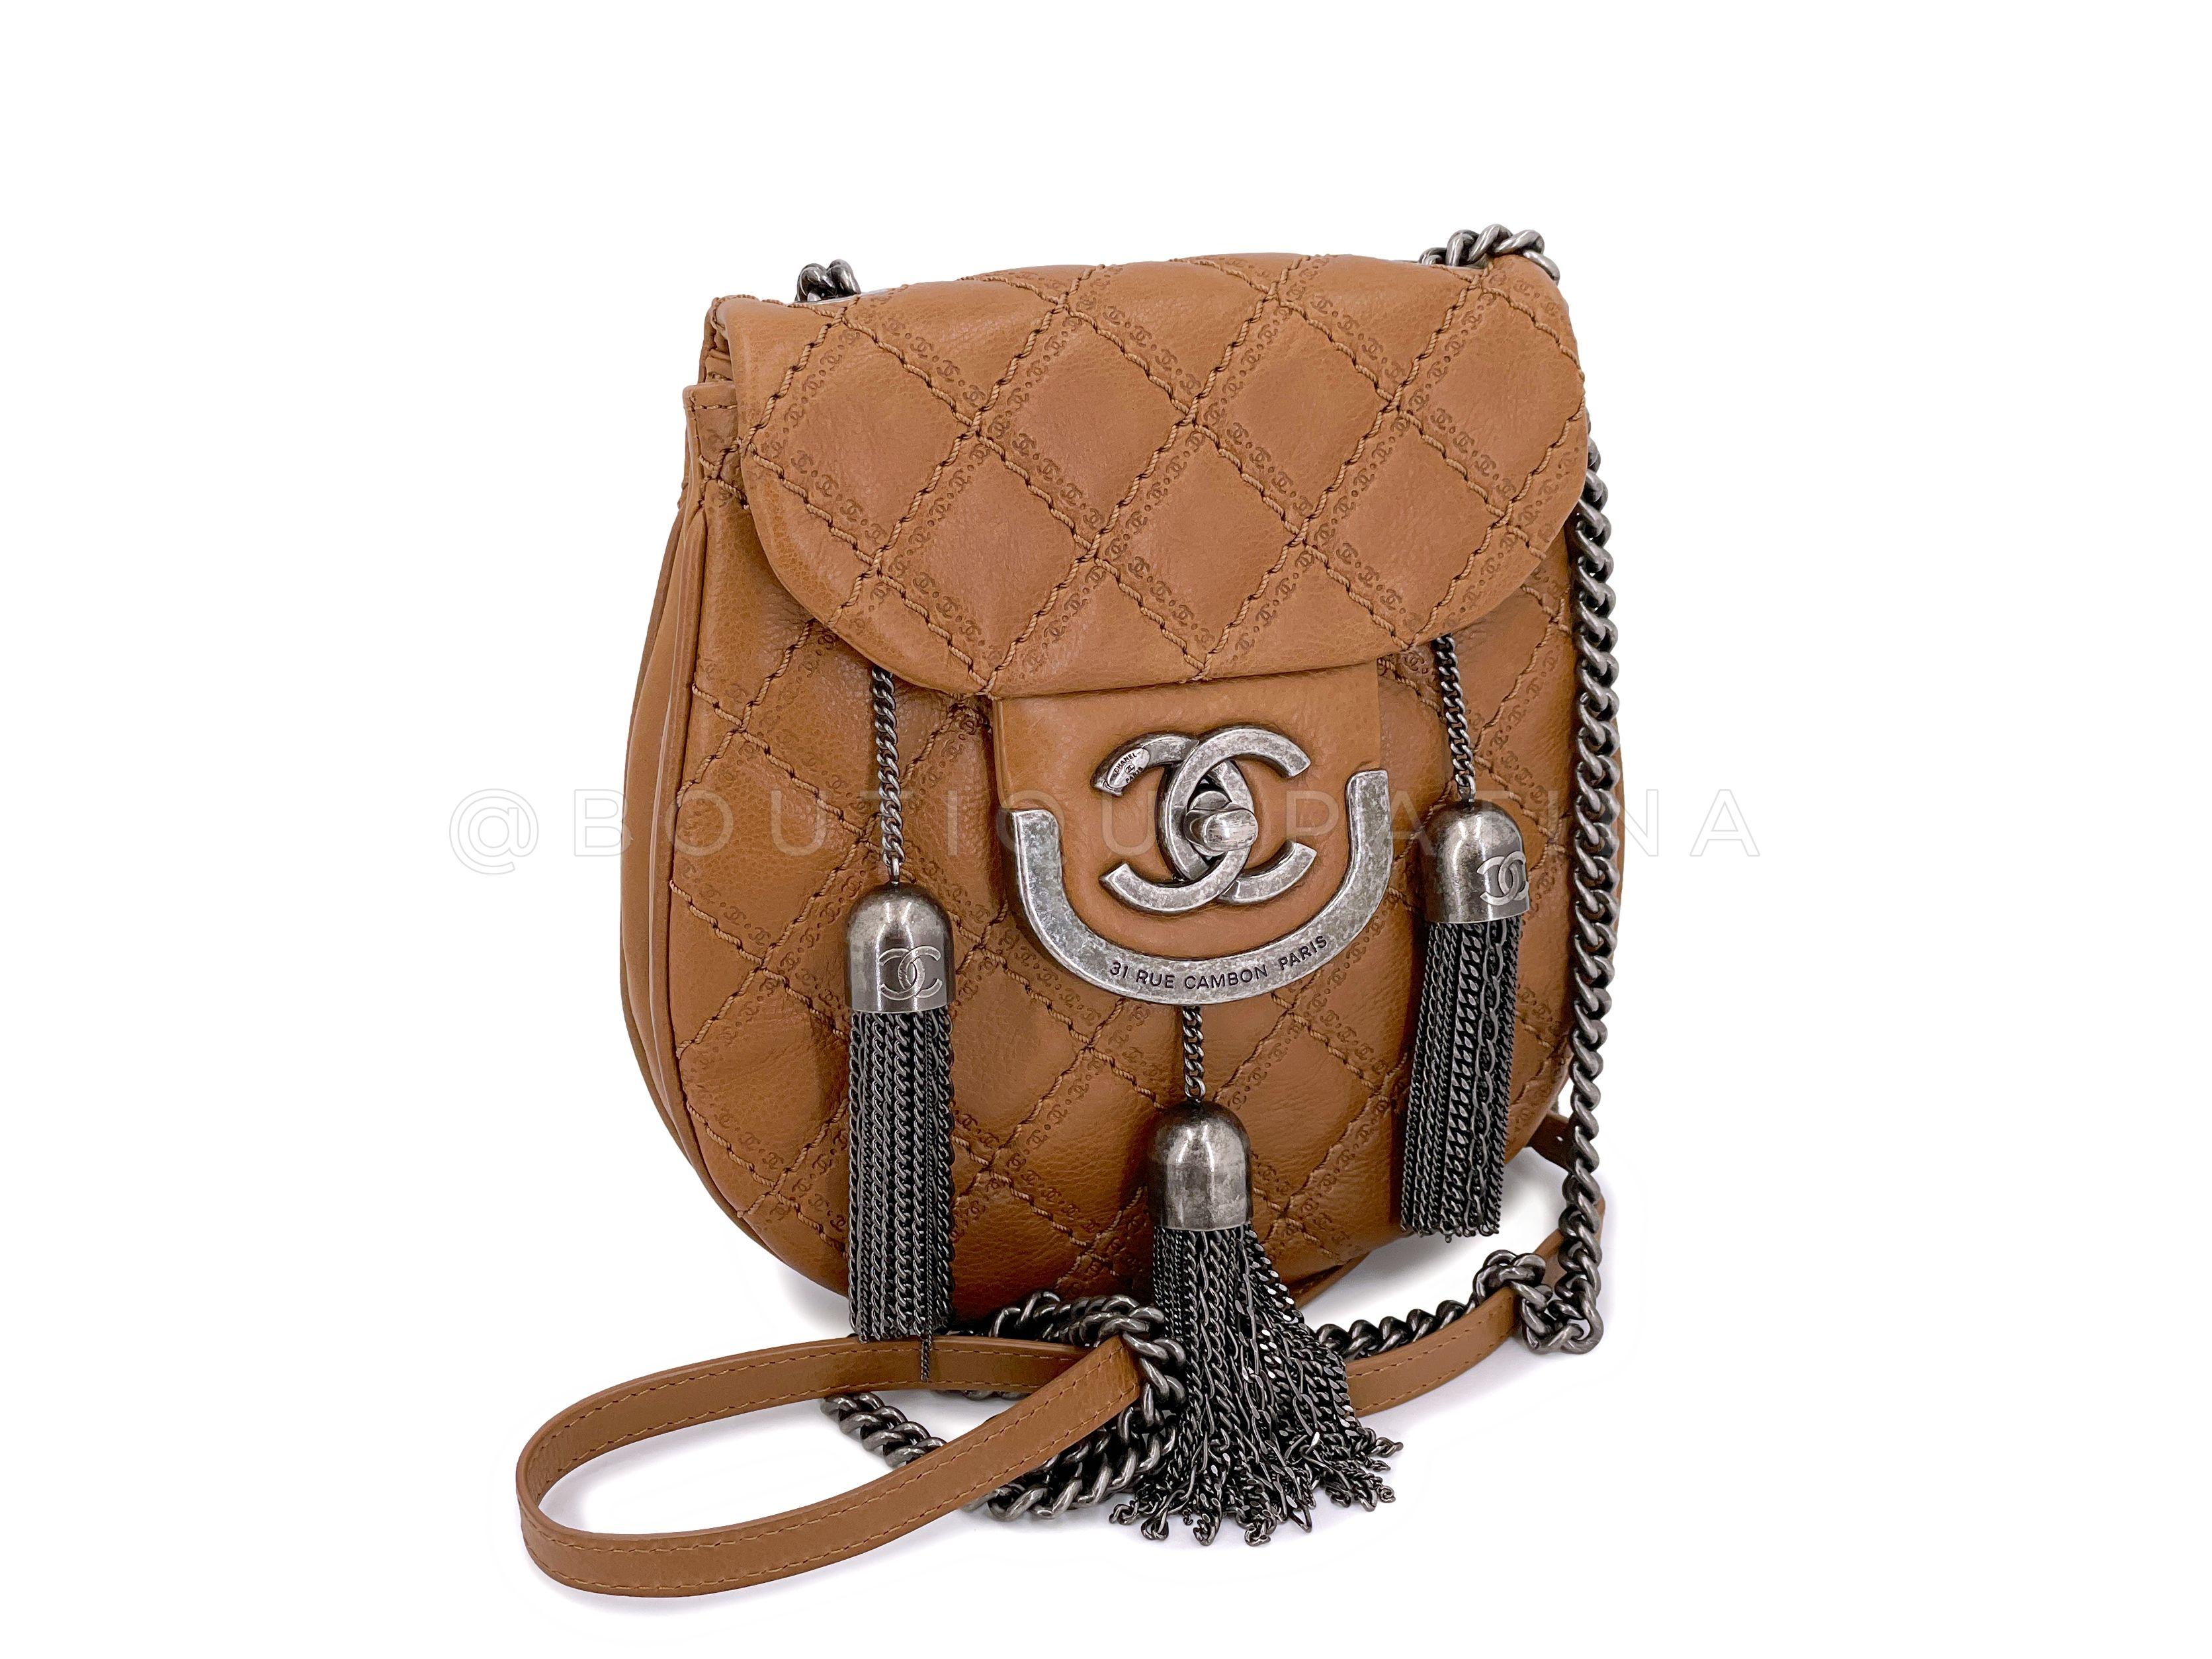 Store item: 66986
Limited production from the 2013 Chanel Paris-Edinburgh collection is this coco sporran flap bag. 

In the shape of a sporran pouch from Scotland with three tassels, this whimsical pouch has a long 24 inch crossbody chain in